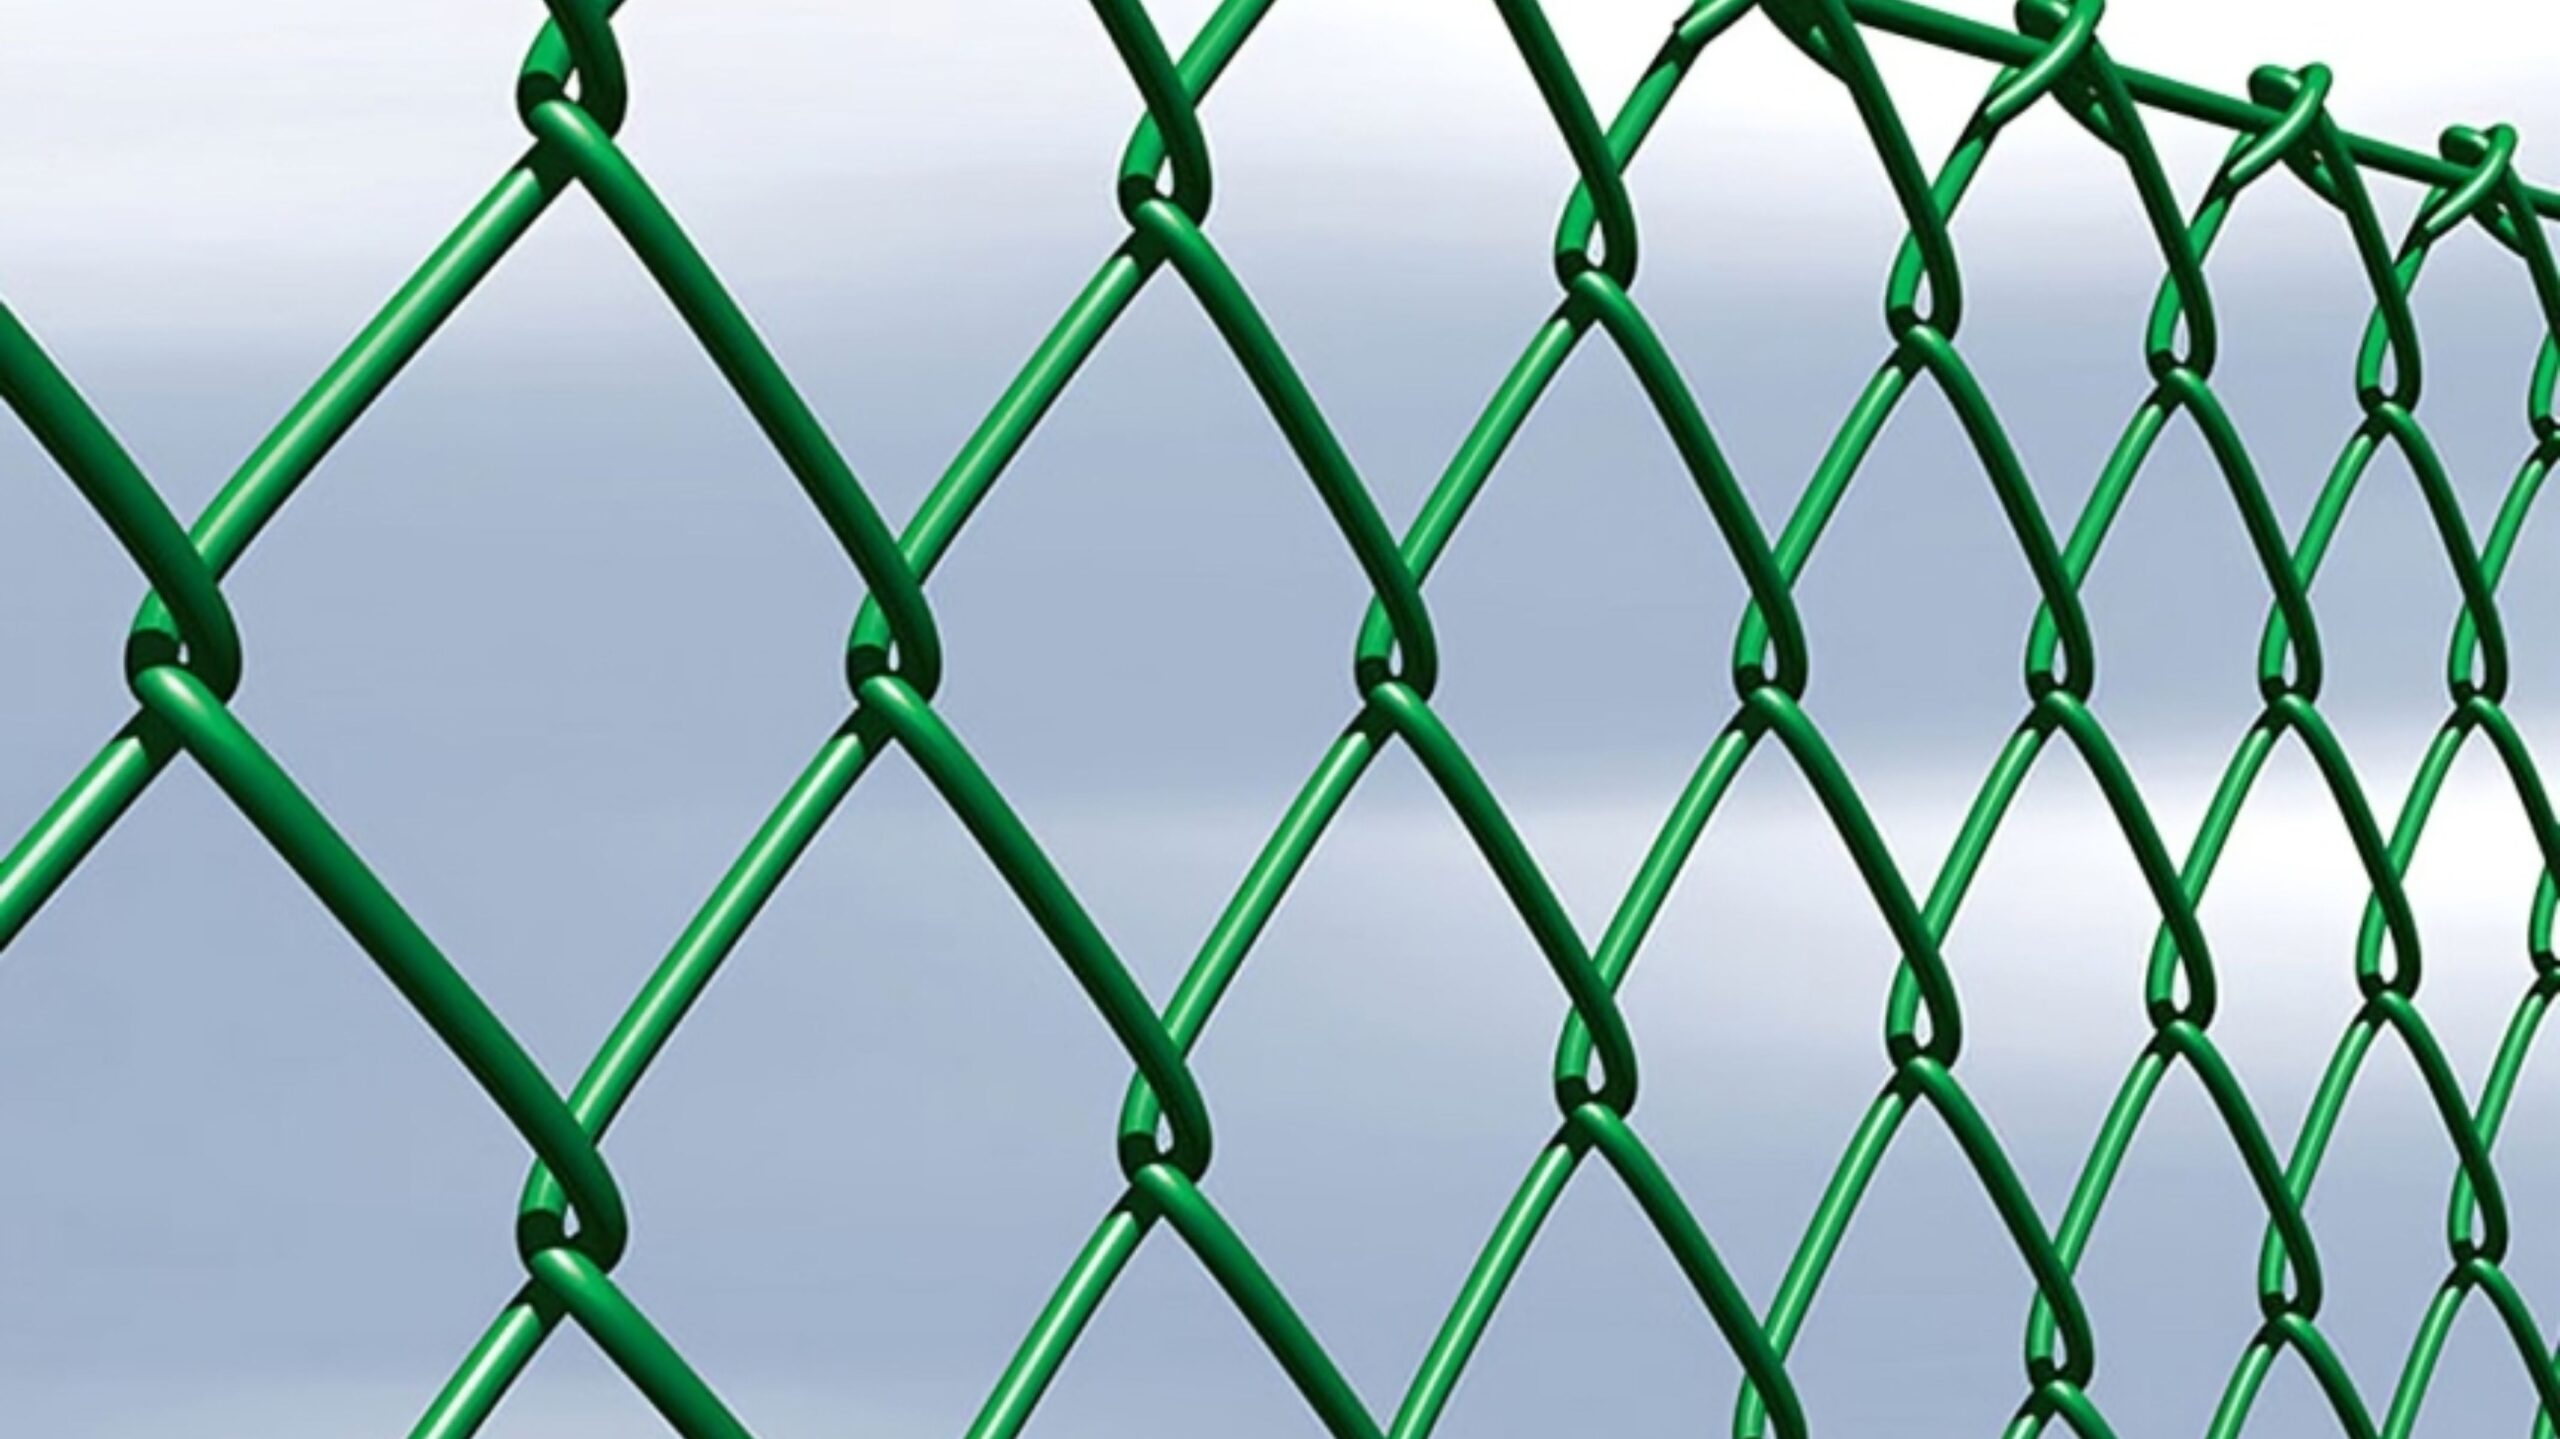 Ganapathy Wire Netting - Best Fencing Contractor – Pvc Chian Link - Fence Manufacturer